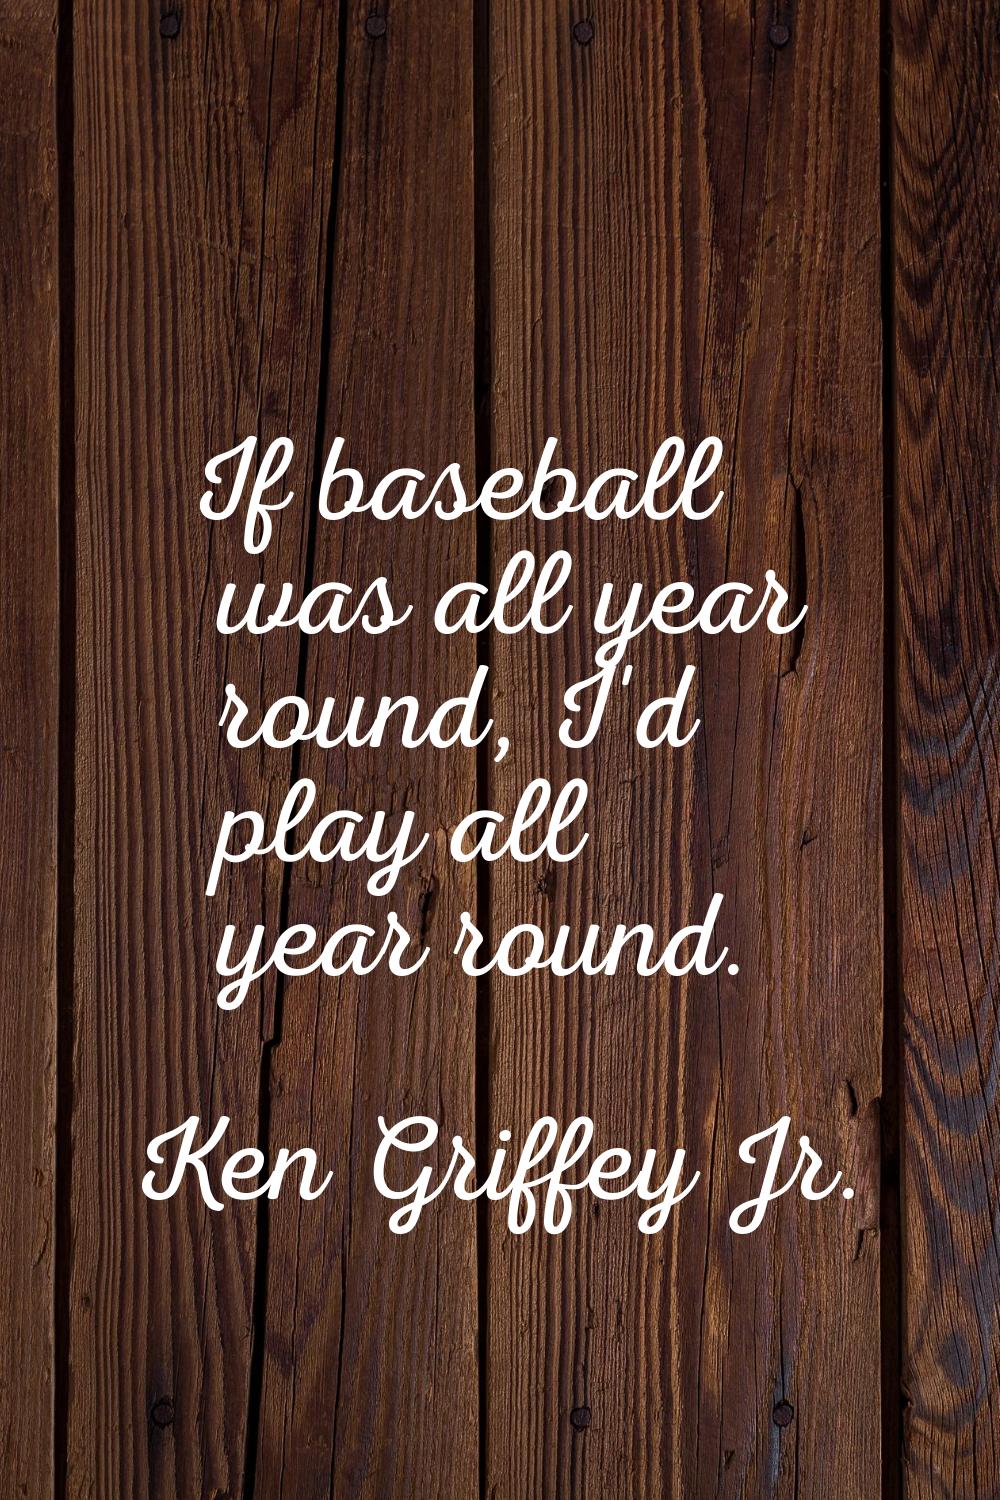 If baseball was all year round, I'd play all year round.